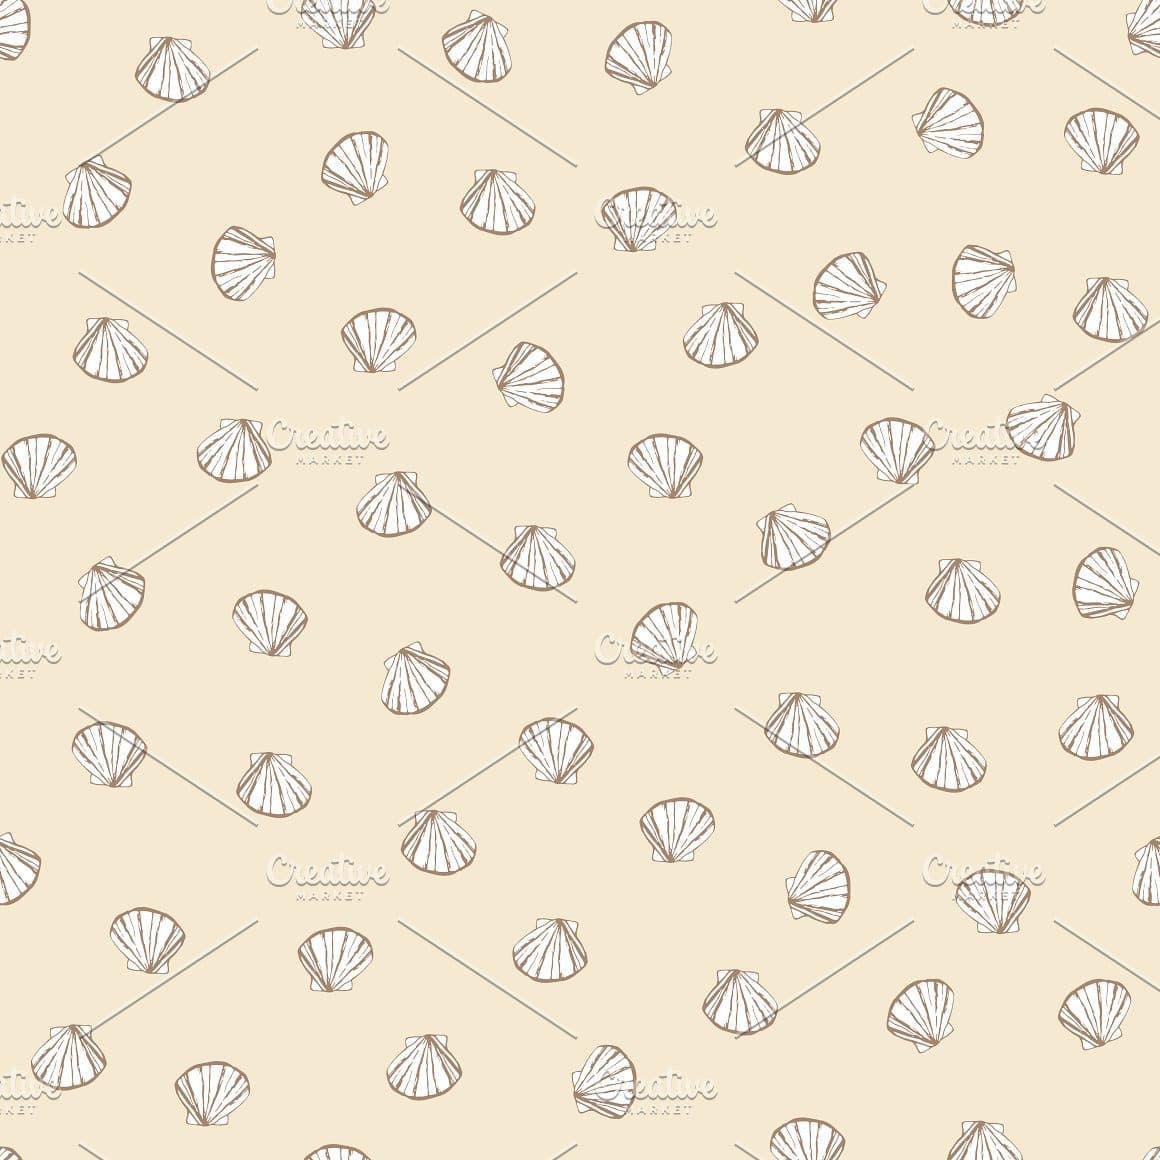 White shells on a beige background.